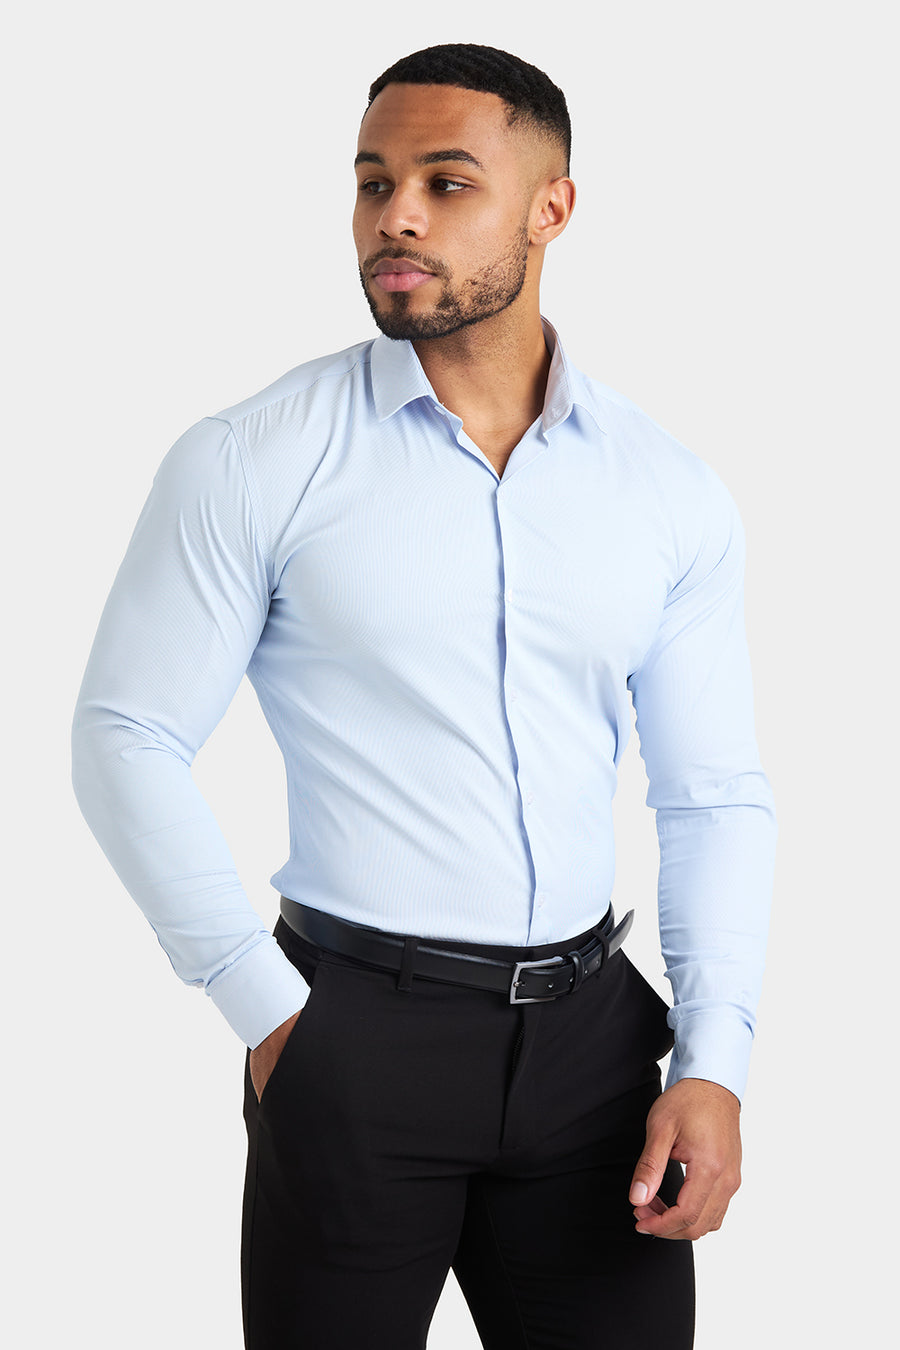 Performance Business Shirt in Blue Fine Stripe - TAILORED ATHLETE - USA